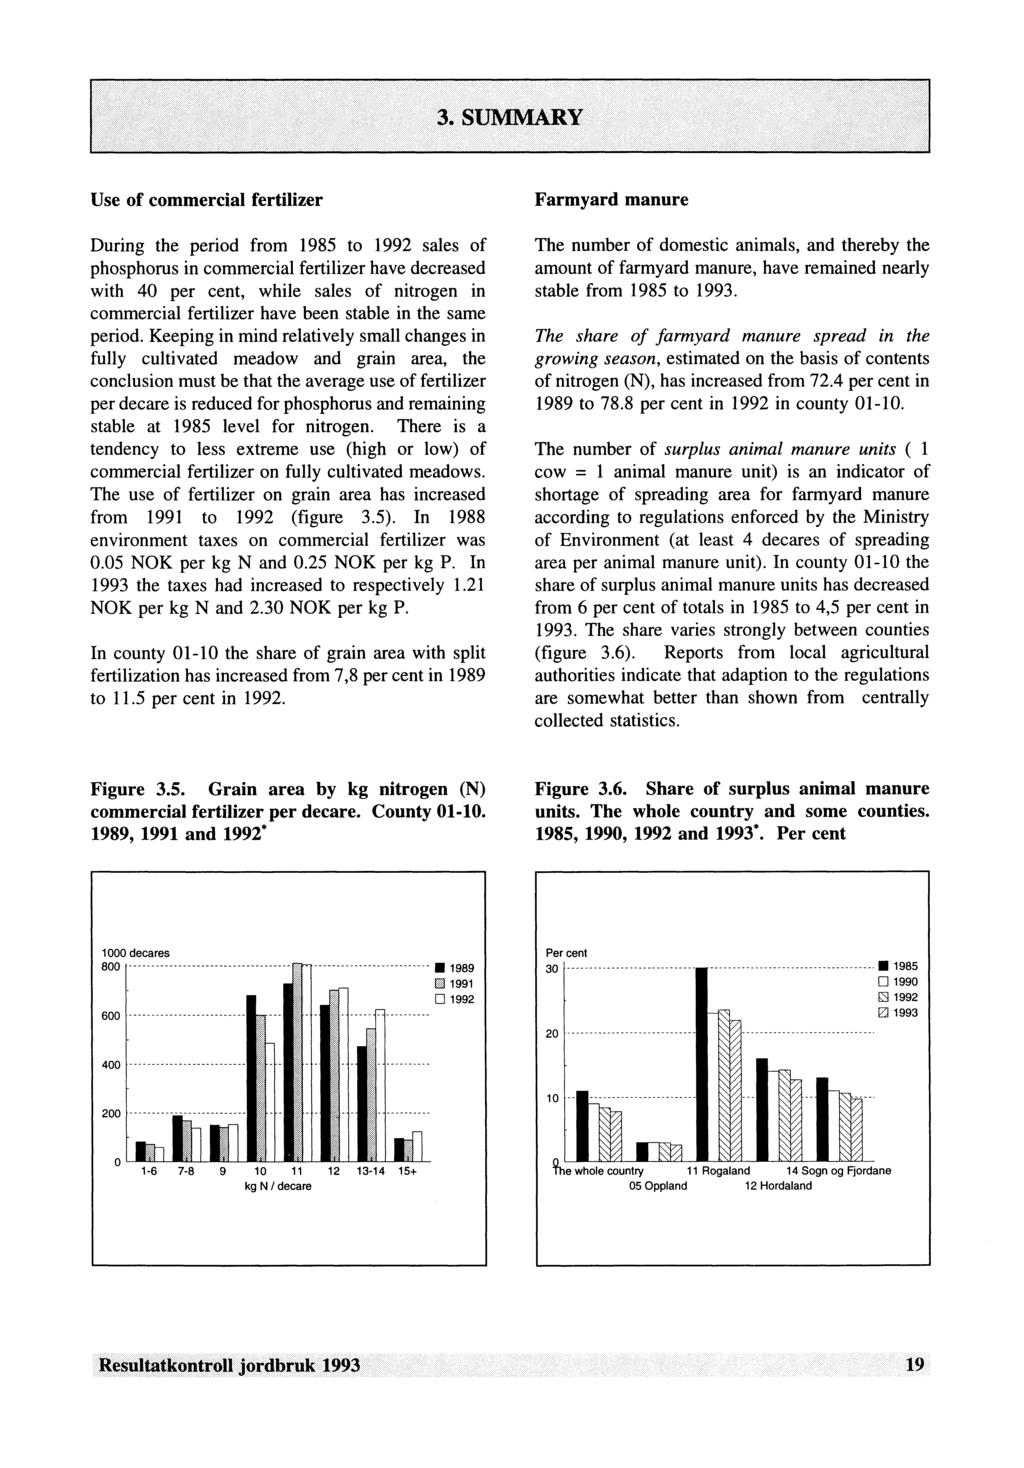 Use of commercial fertilizer During the period from 1985 to 1992 sales of phosphorus in commercial fertilizer have decreased with 40 per cent, while sales of nitrogen in commercial fertilizer have